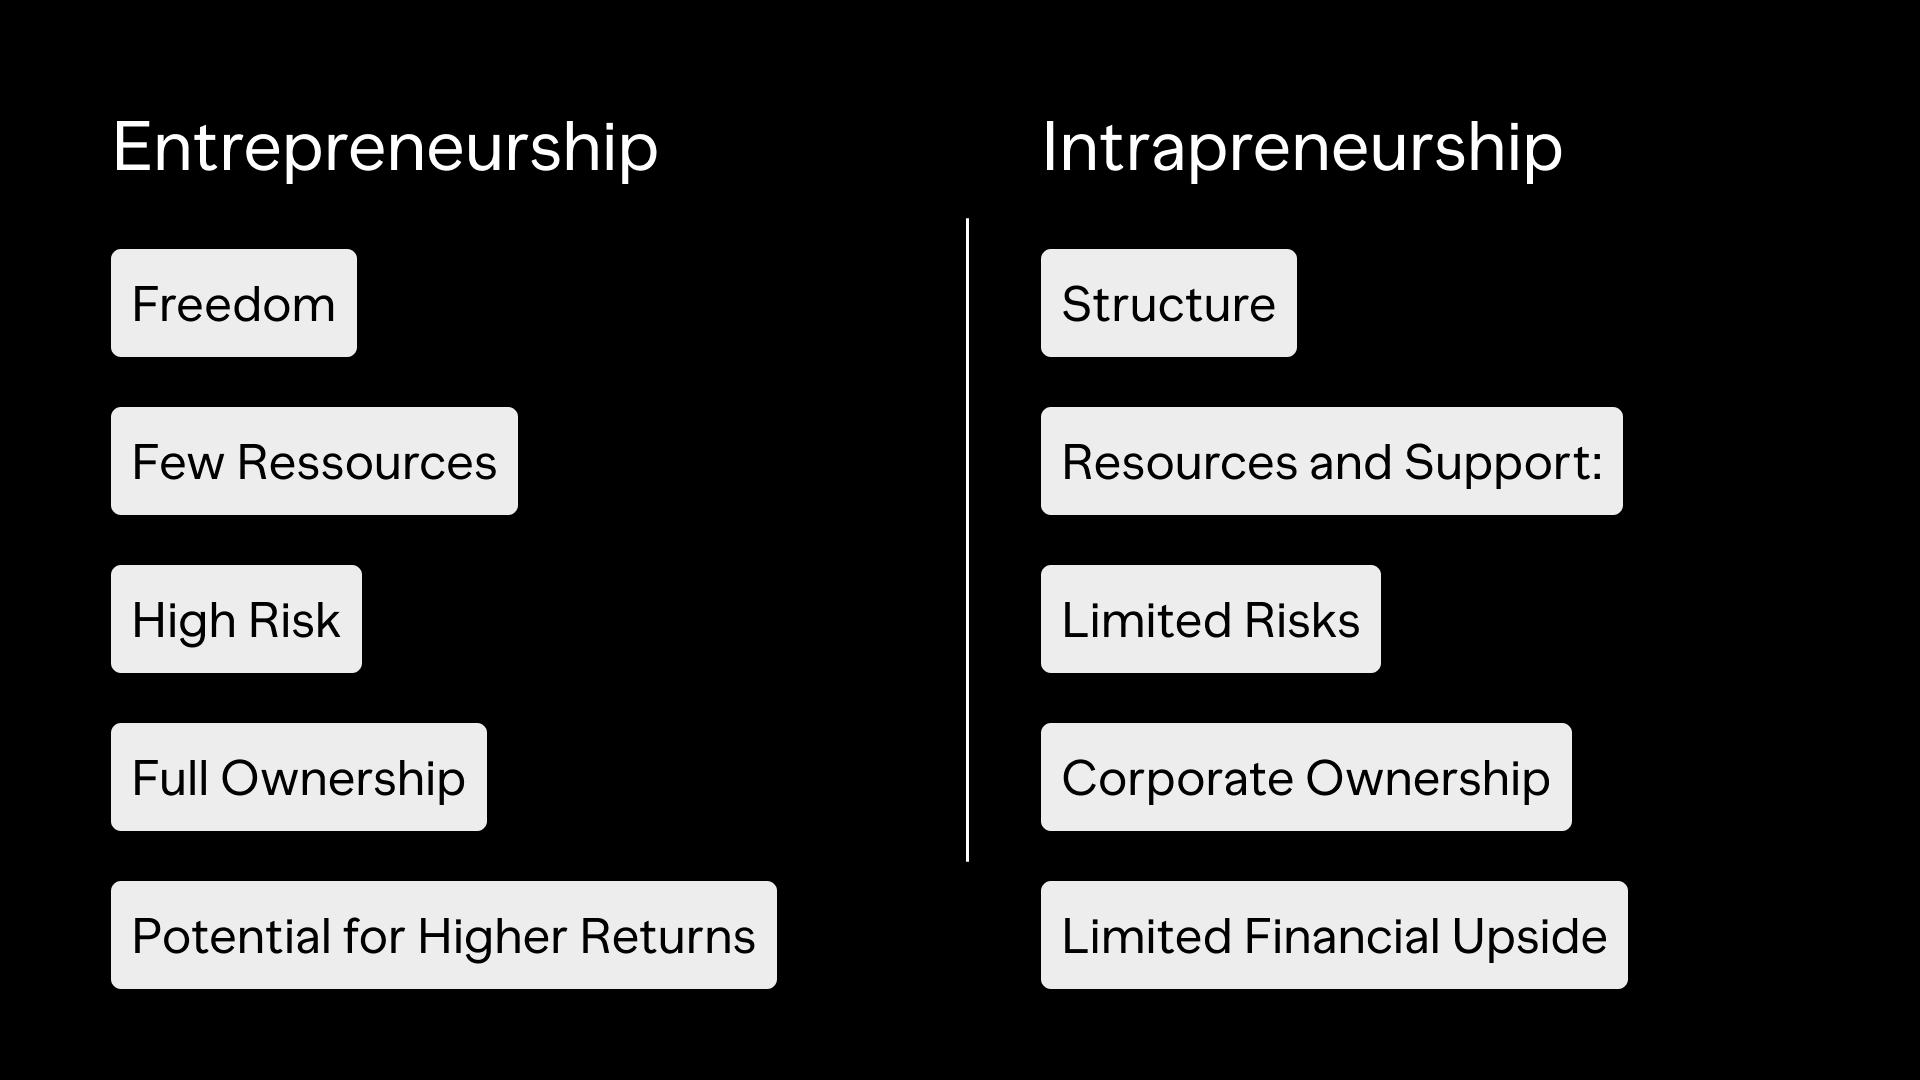 Image of the key differences between entrepreneurs and intrapreneurs